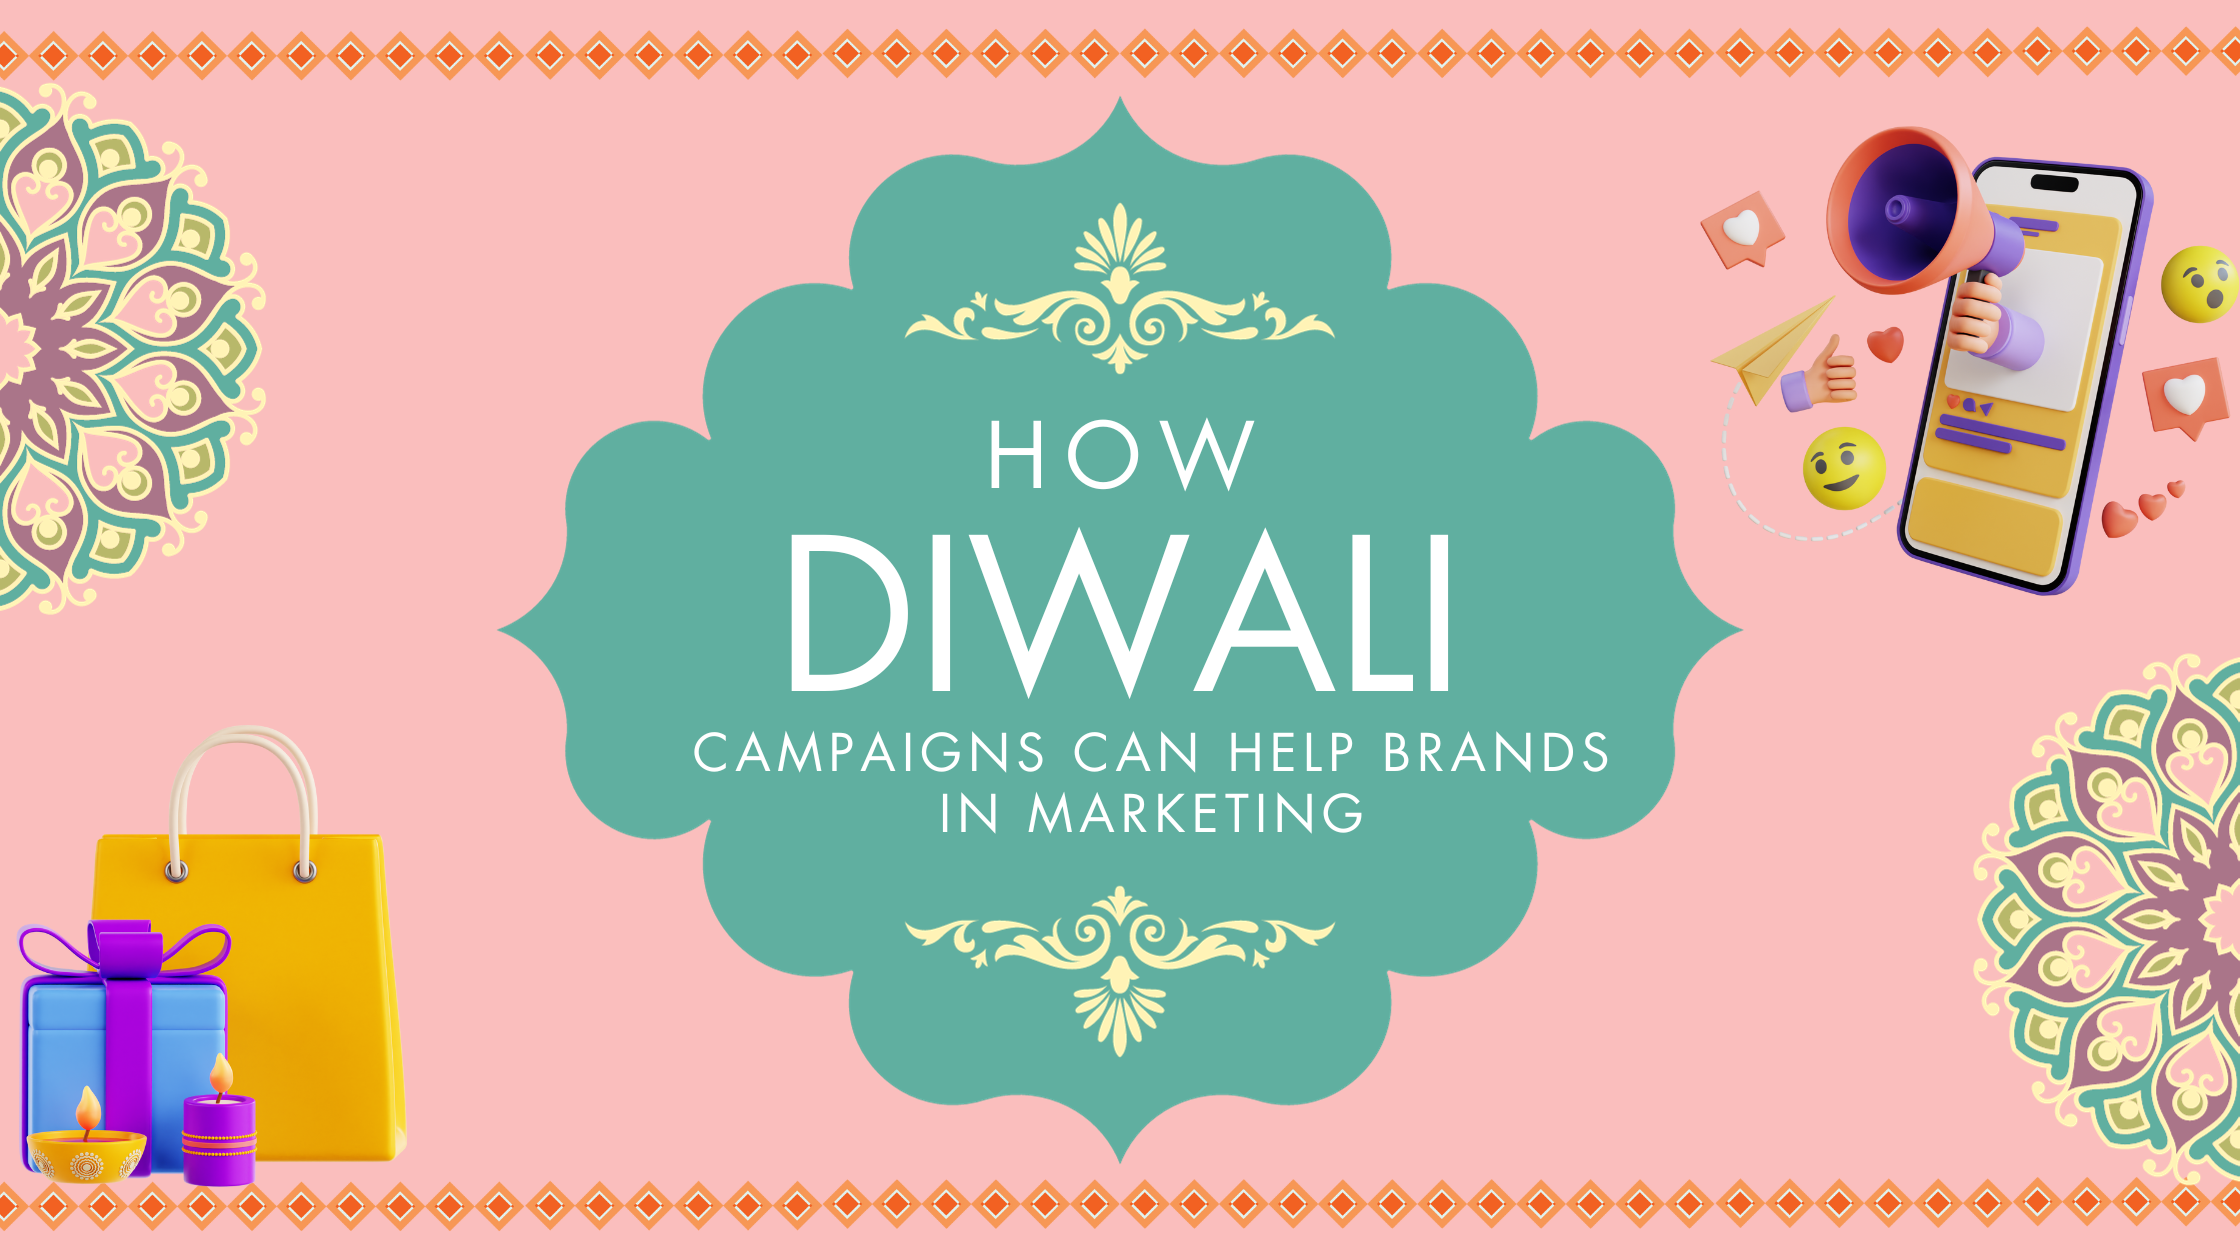 How Diwali campaigns can help brands in marketing